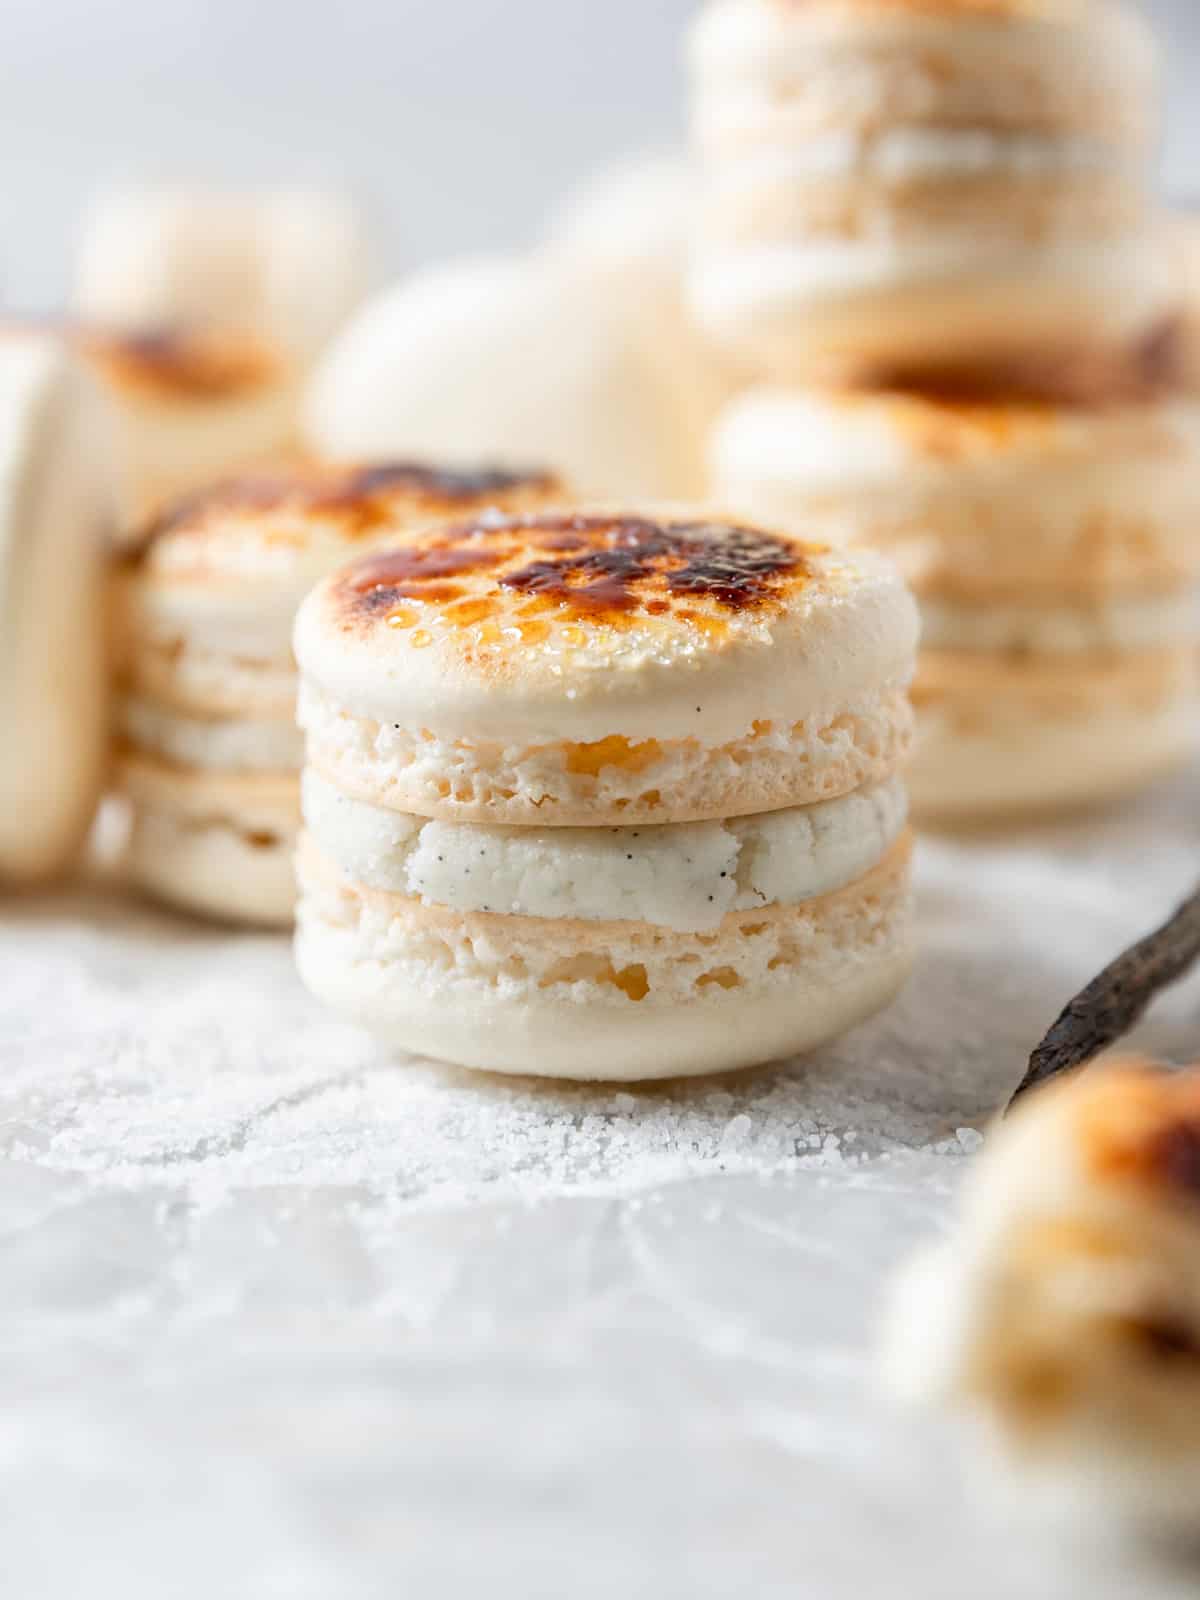 a creme brûlée macaron on a bed of sugar with several other macarons behind it.